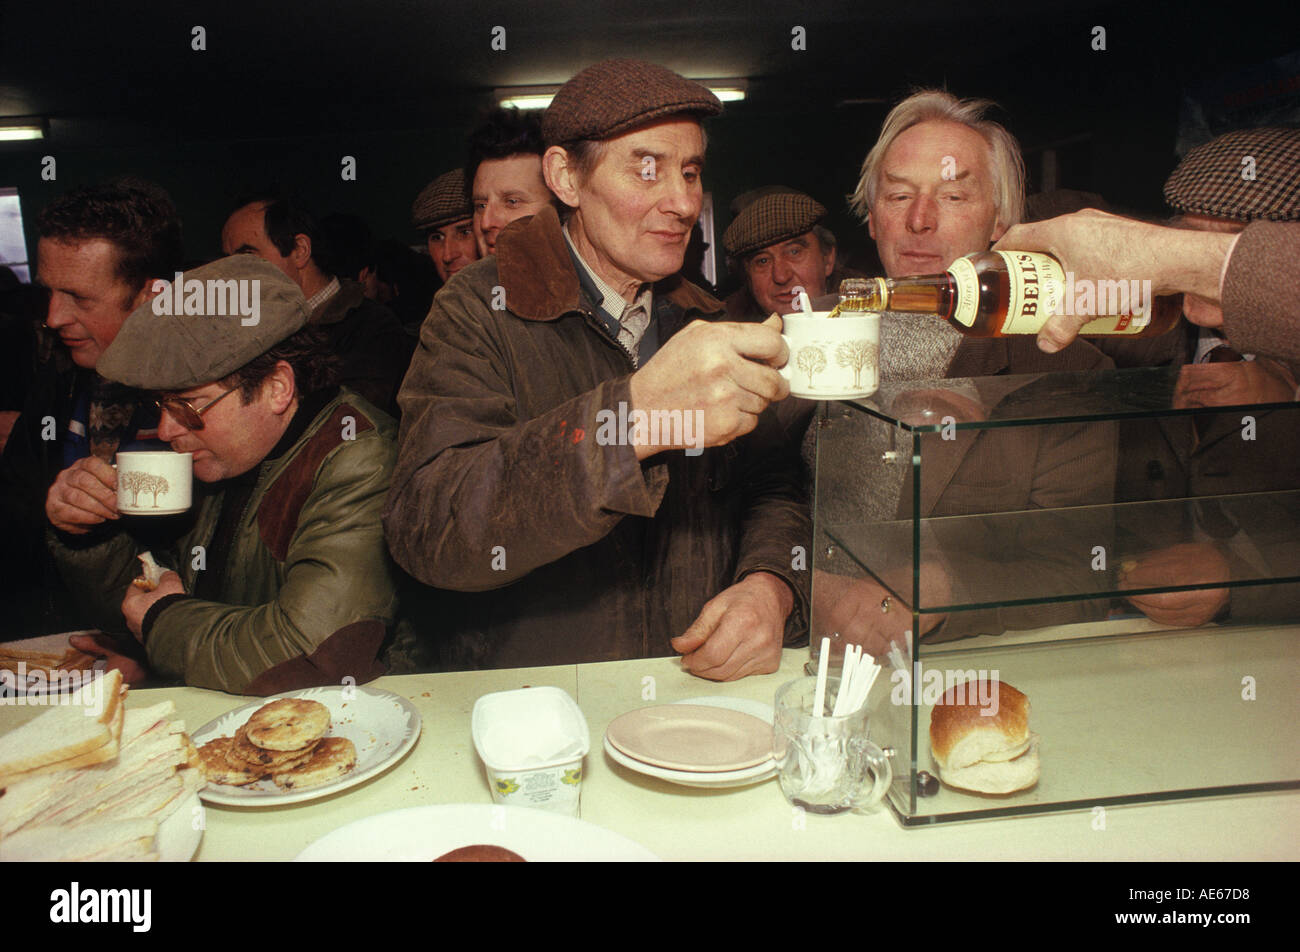 Farmers enjoy cup of tea and a splash of Bells Whisky, Farmers Christmas Market Knighton, Shropshire & Powys Wales December 1985 1980s UK HOMER SYKES Stock Photo